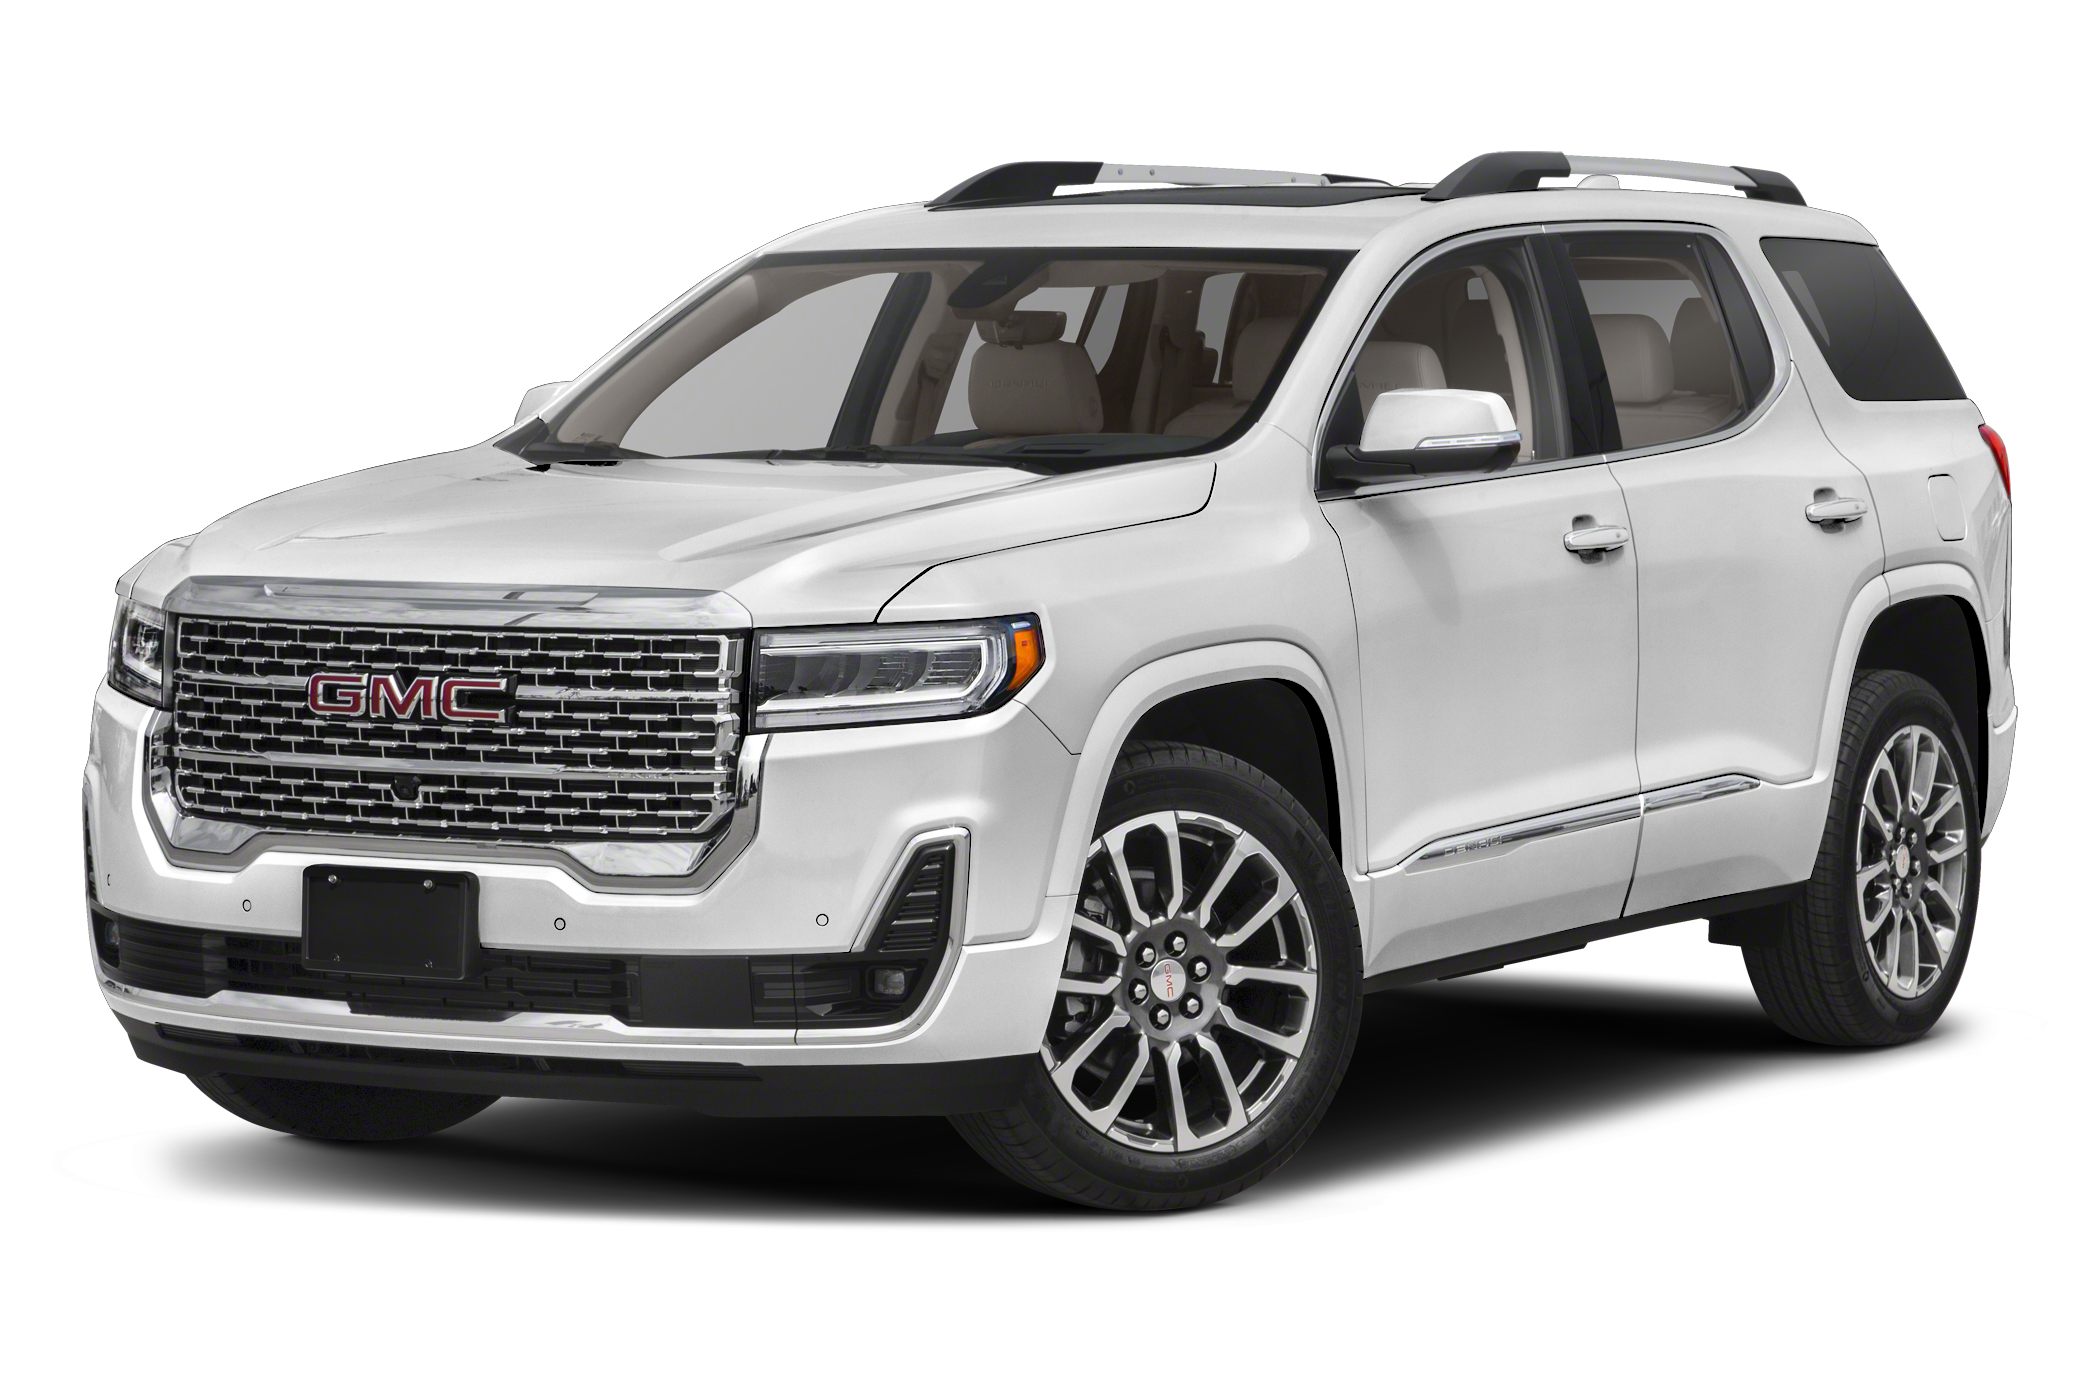 Great Deals on a new 2023 GMC Acadia Denali FrontWheel Drive at The Autoblog Smart Buy Program